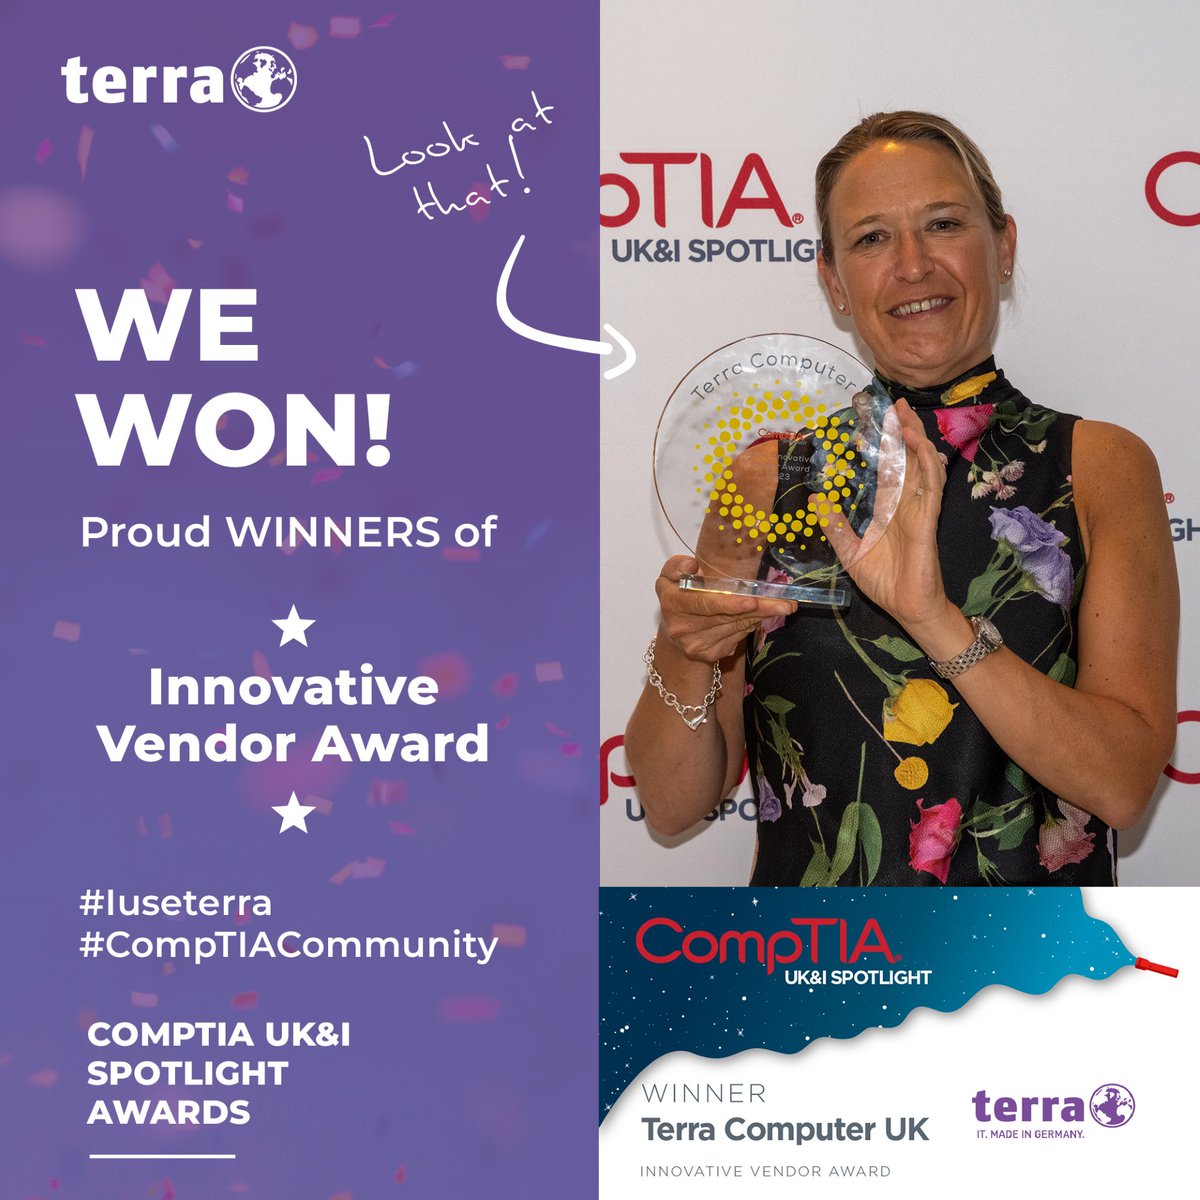 We have won the Innovative Vendor Award!

A huge thank you to CompTIA for the nomination and for hosting another great event! 

#Iuseterra #CompTIACommunity